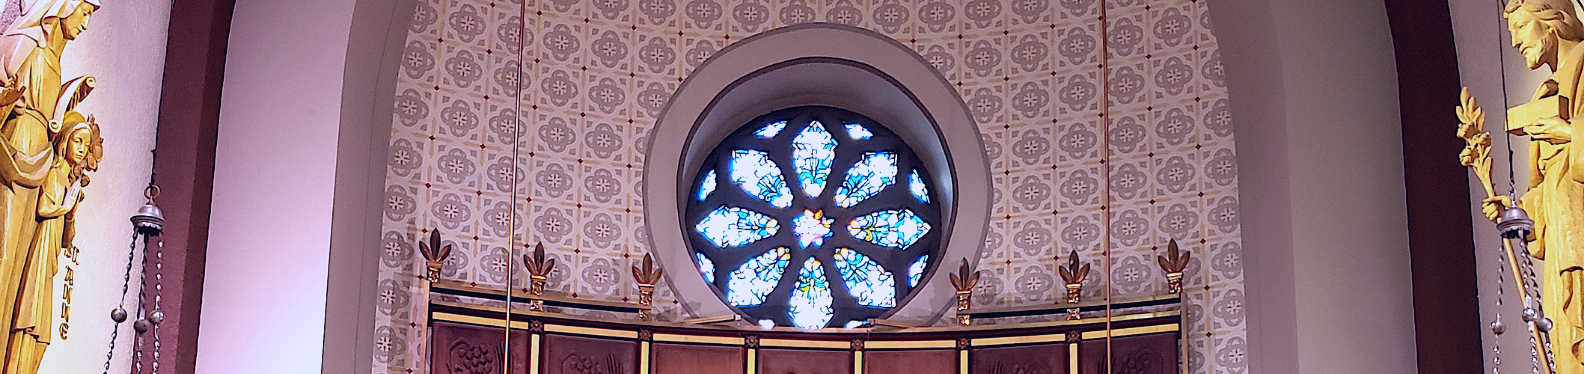 Stained glass window over the tabernacle area